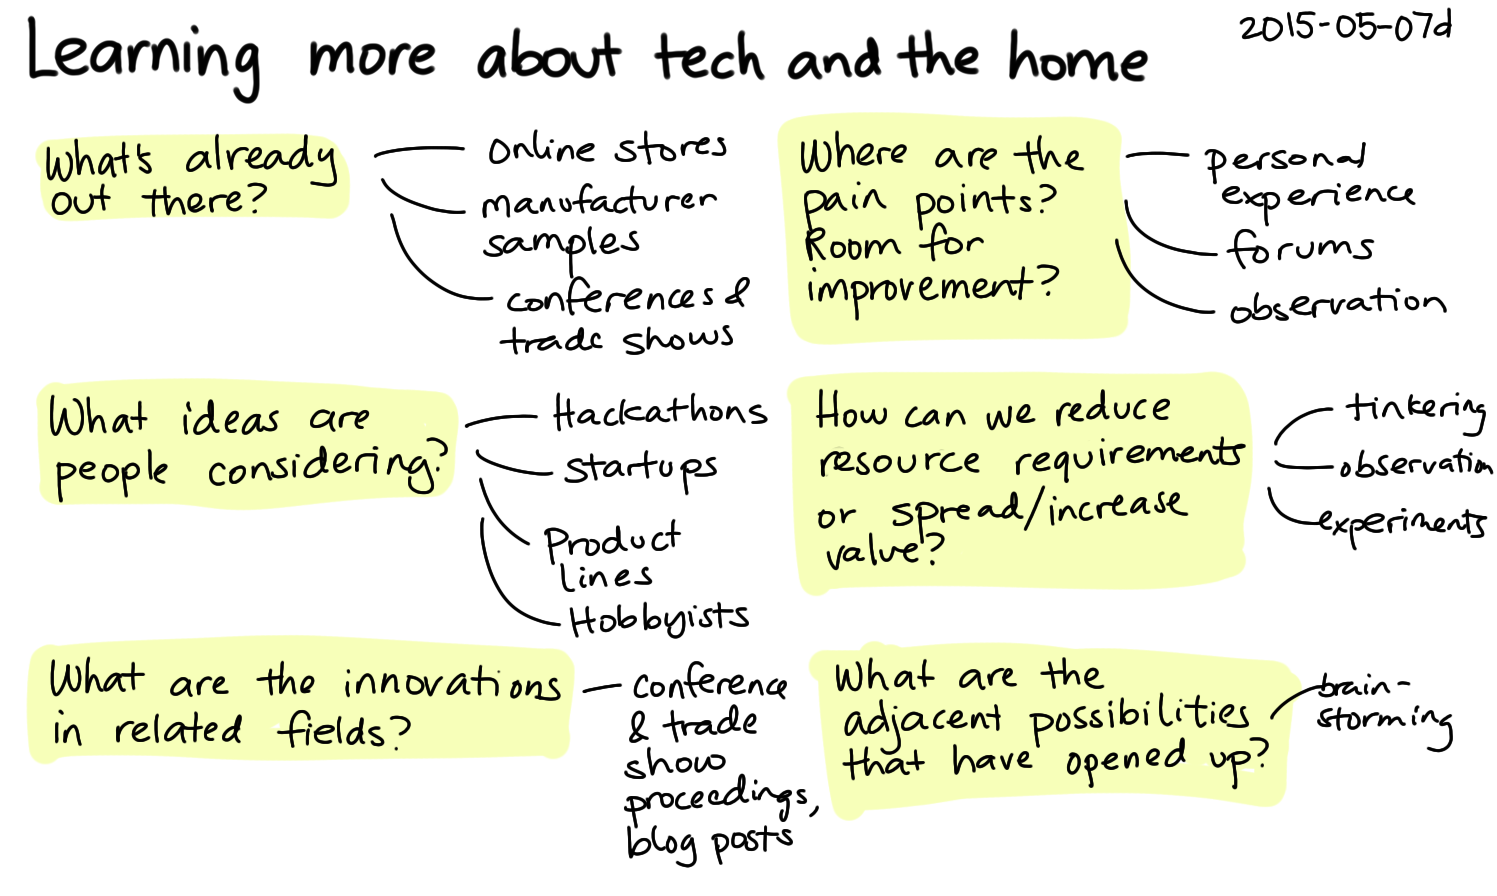 2015-05-07d Learning more about tech and the home -- index card #technodomesticity #tech-and-home.png